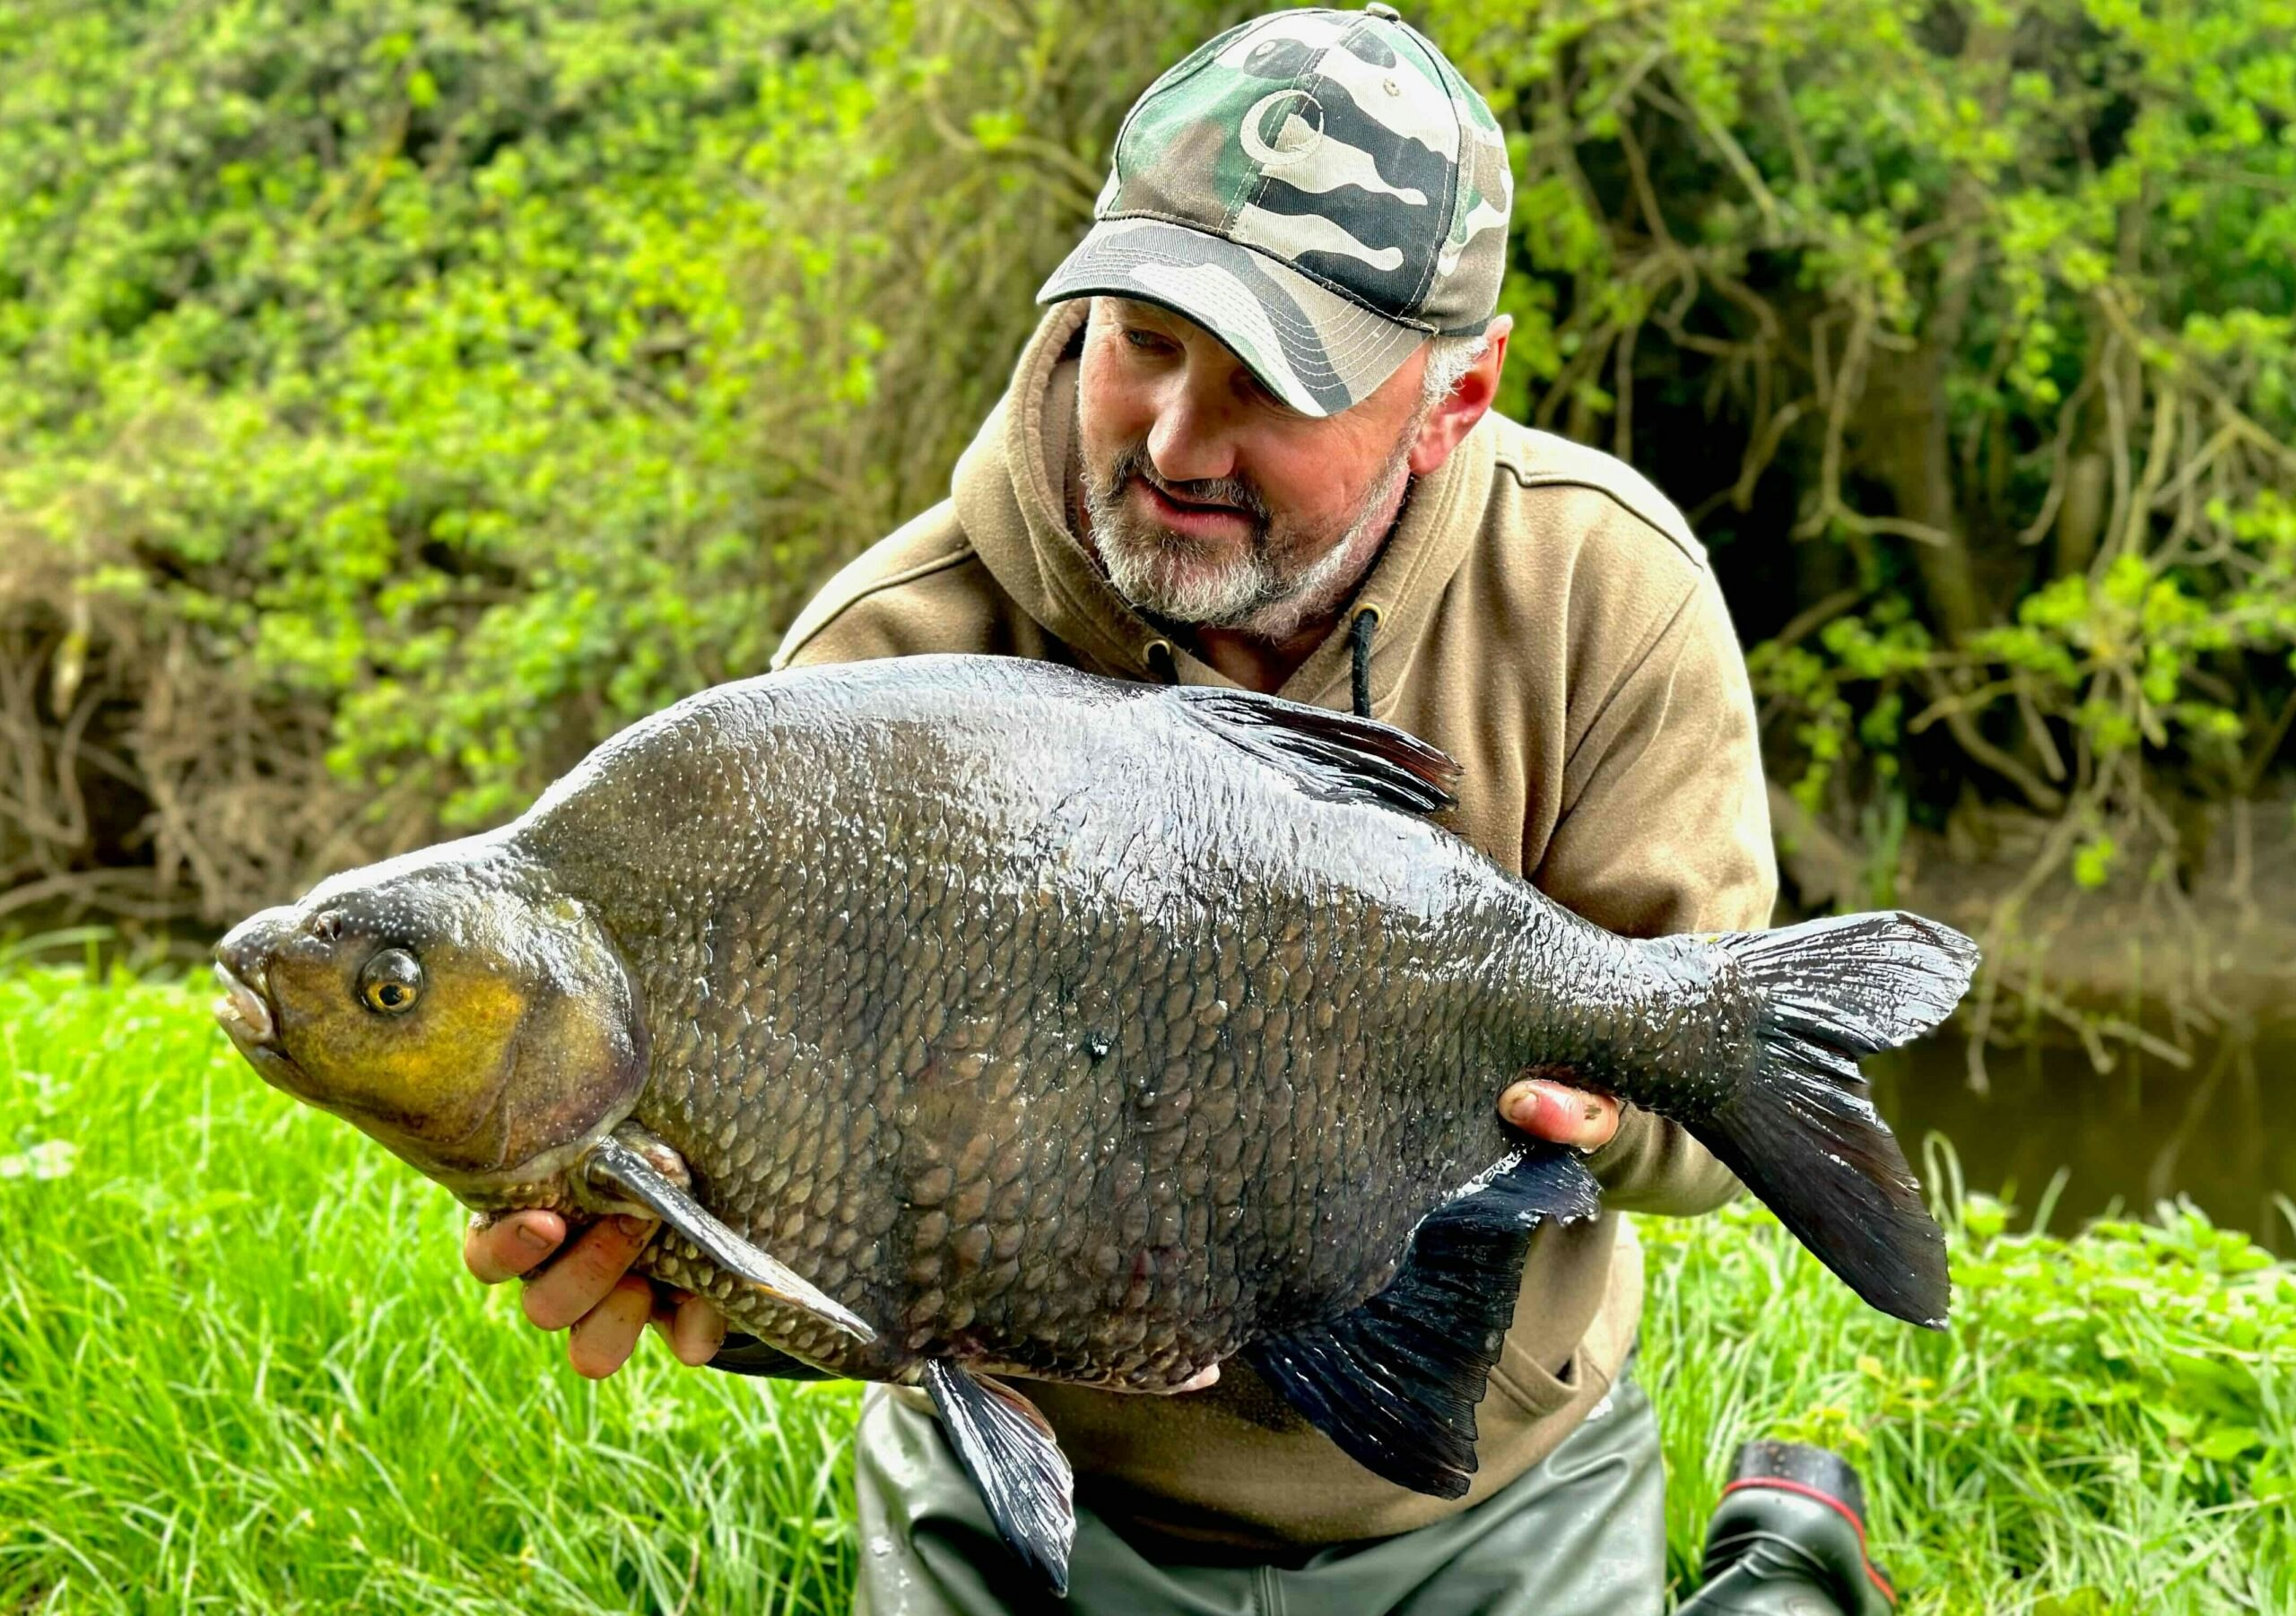 Lee with his gnarly, old 18lb 10oz bream.